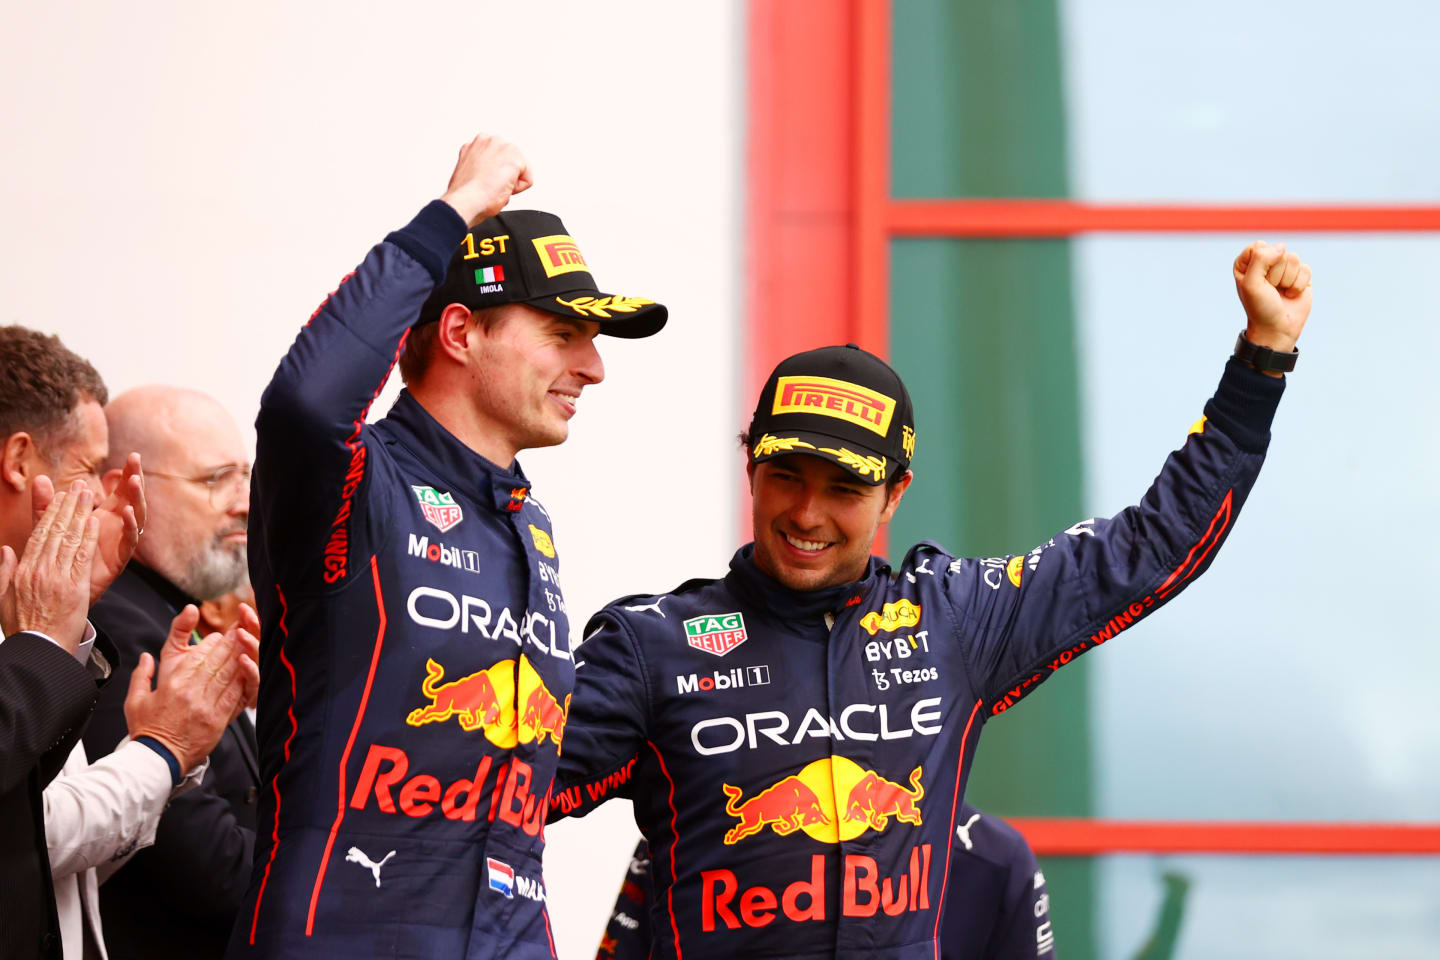 IMOLA, ITALY - APRIL 24: Race winner Max Verstappen of the Netherlands and Oracle Red Bull Racing